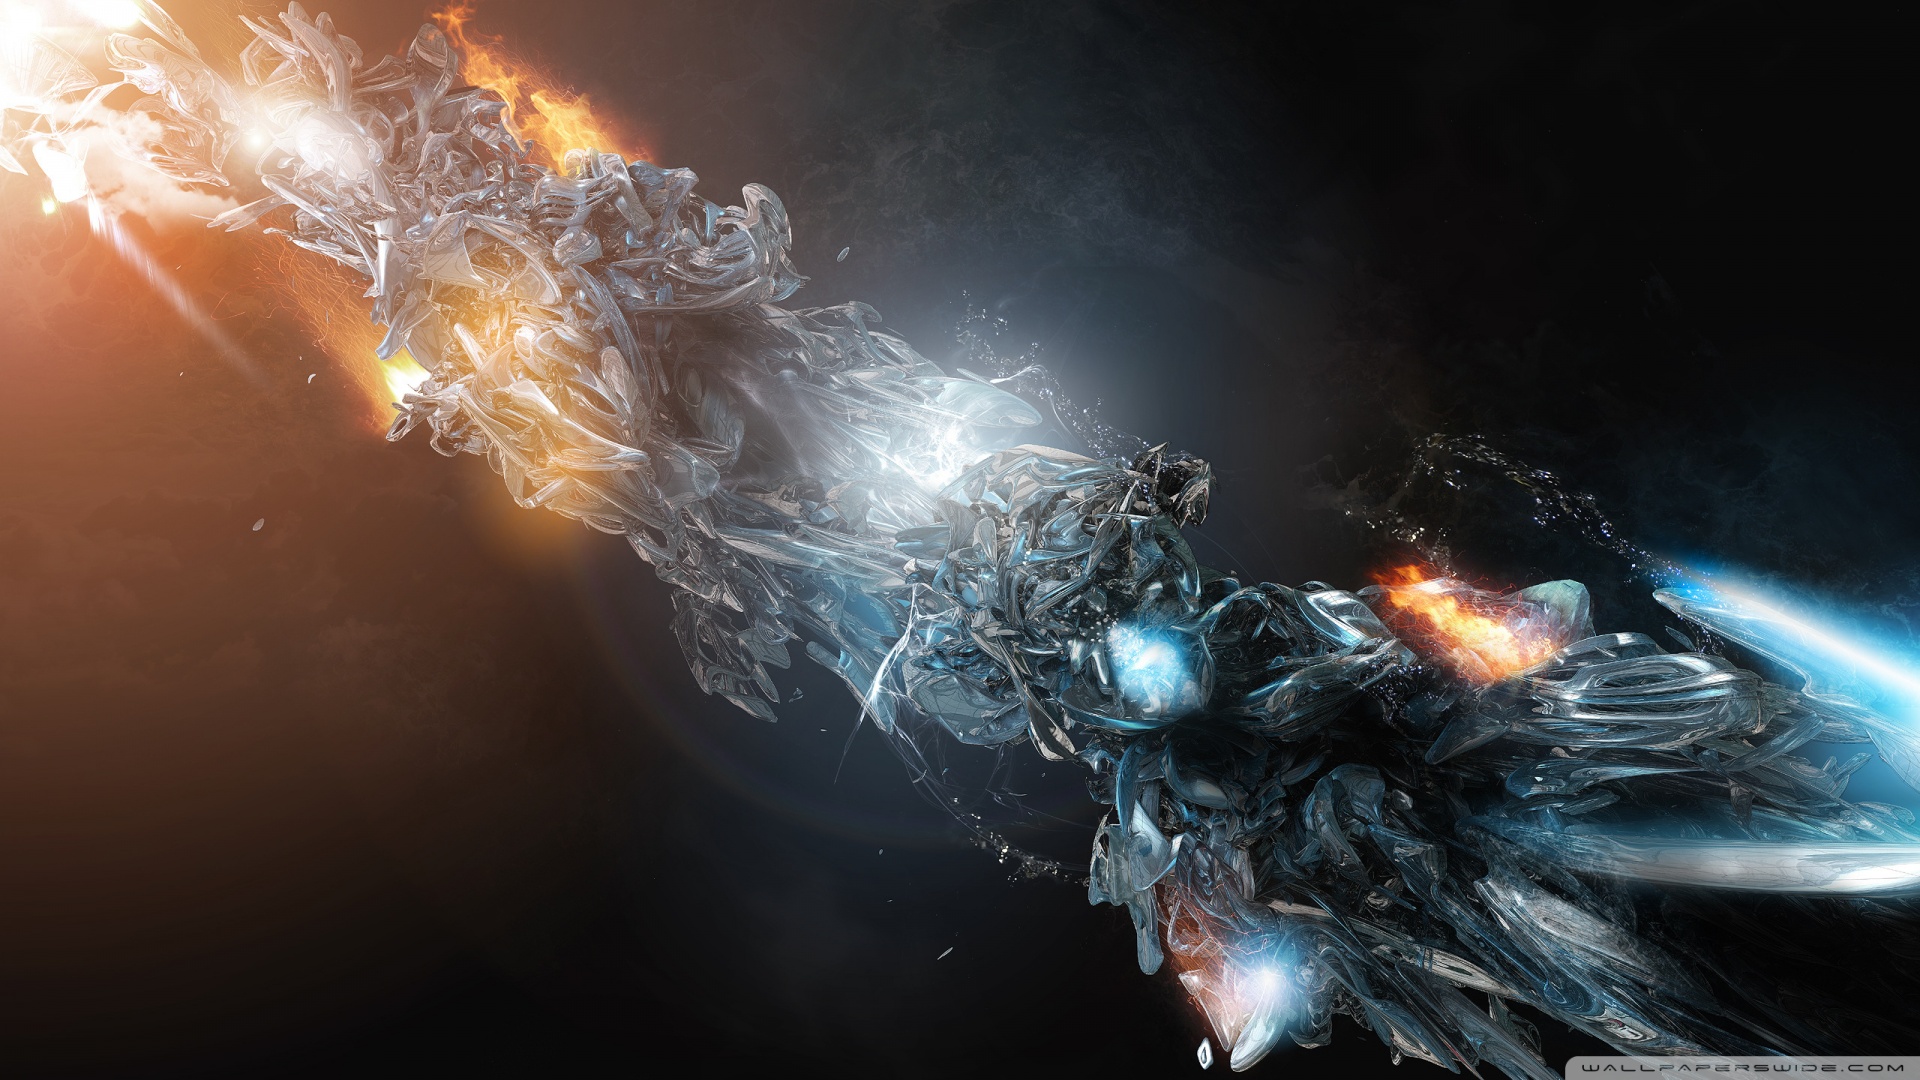 Fire And Ice 4k - HD Wallpaper 